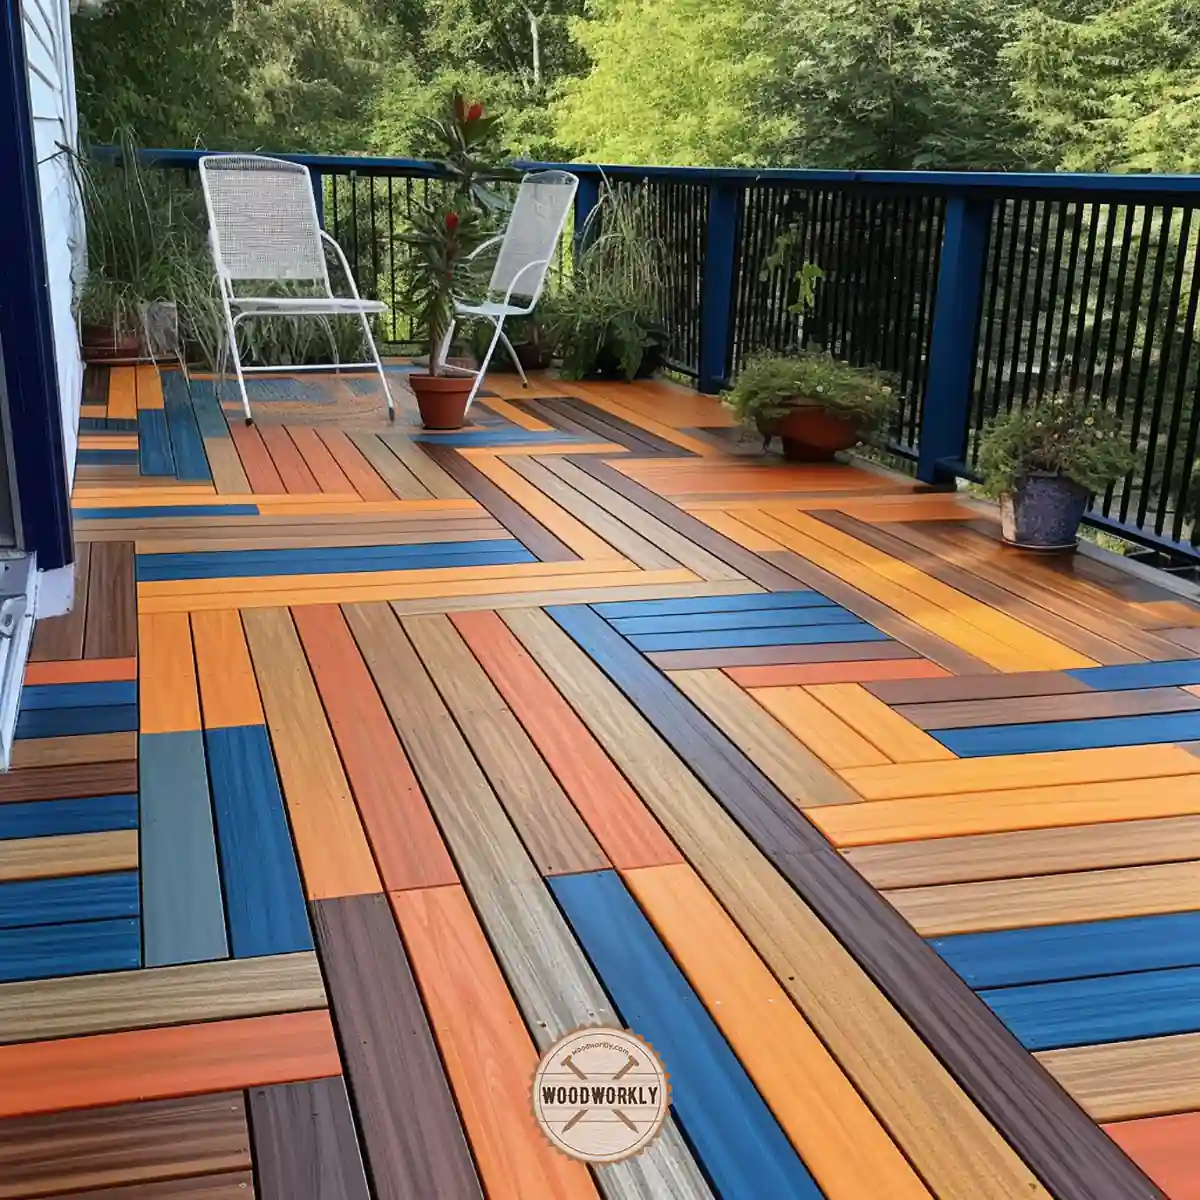 Deck stained by mixing different colors of stains